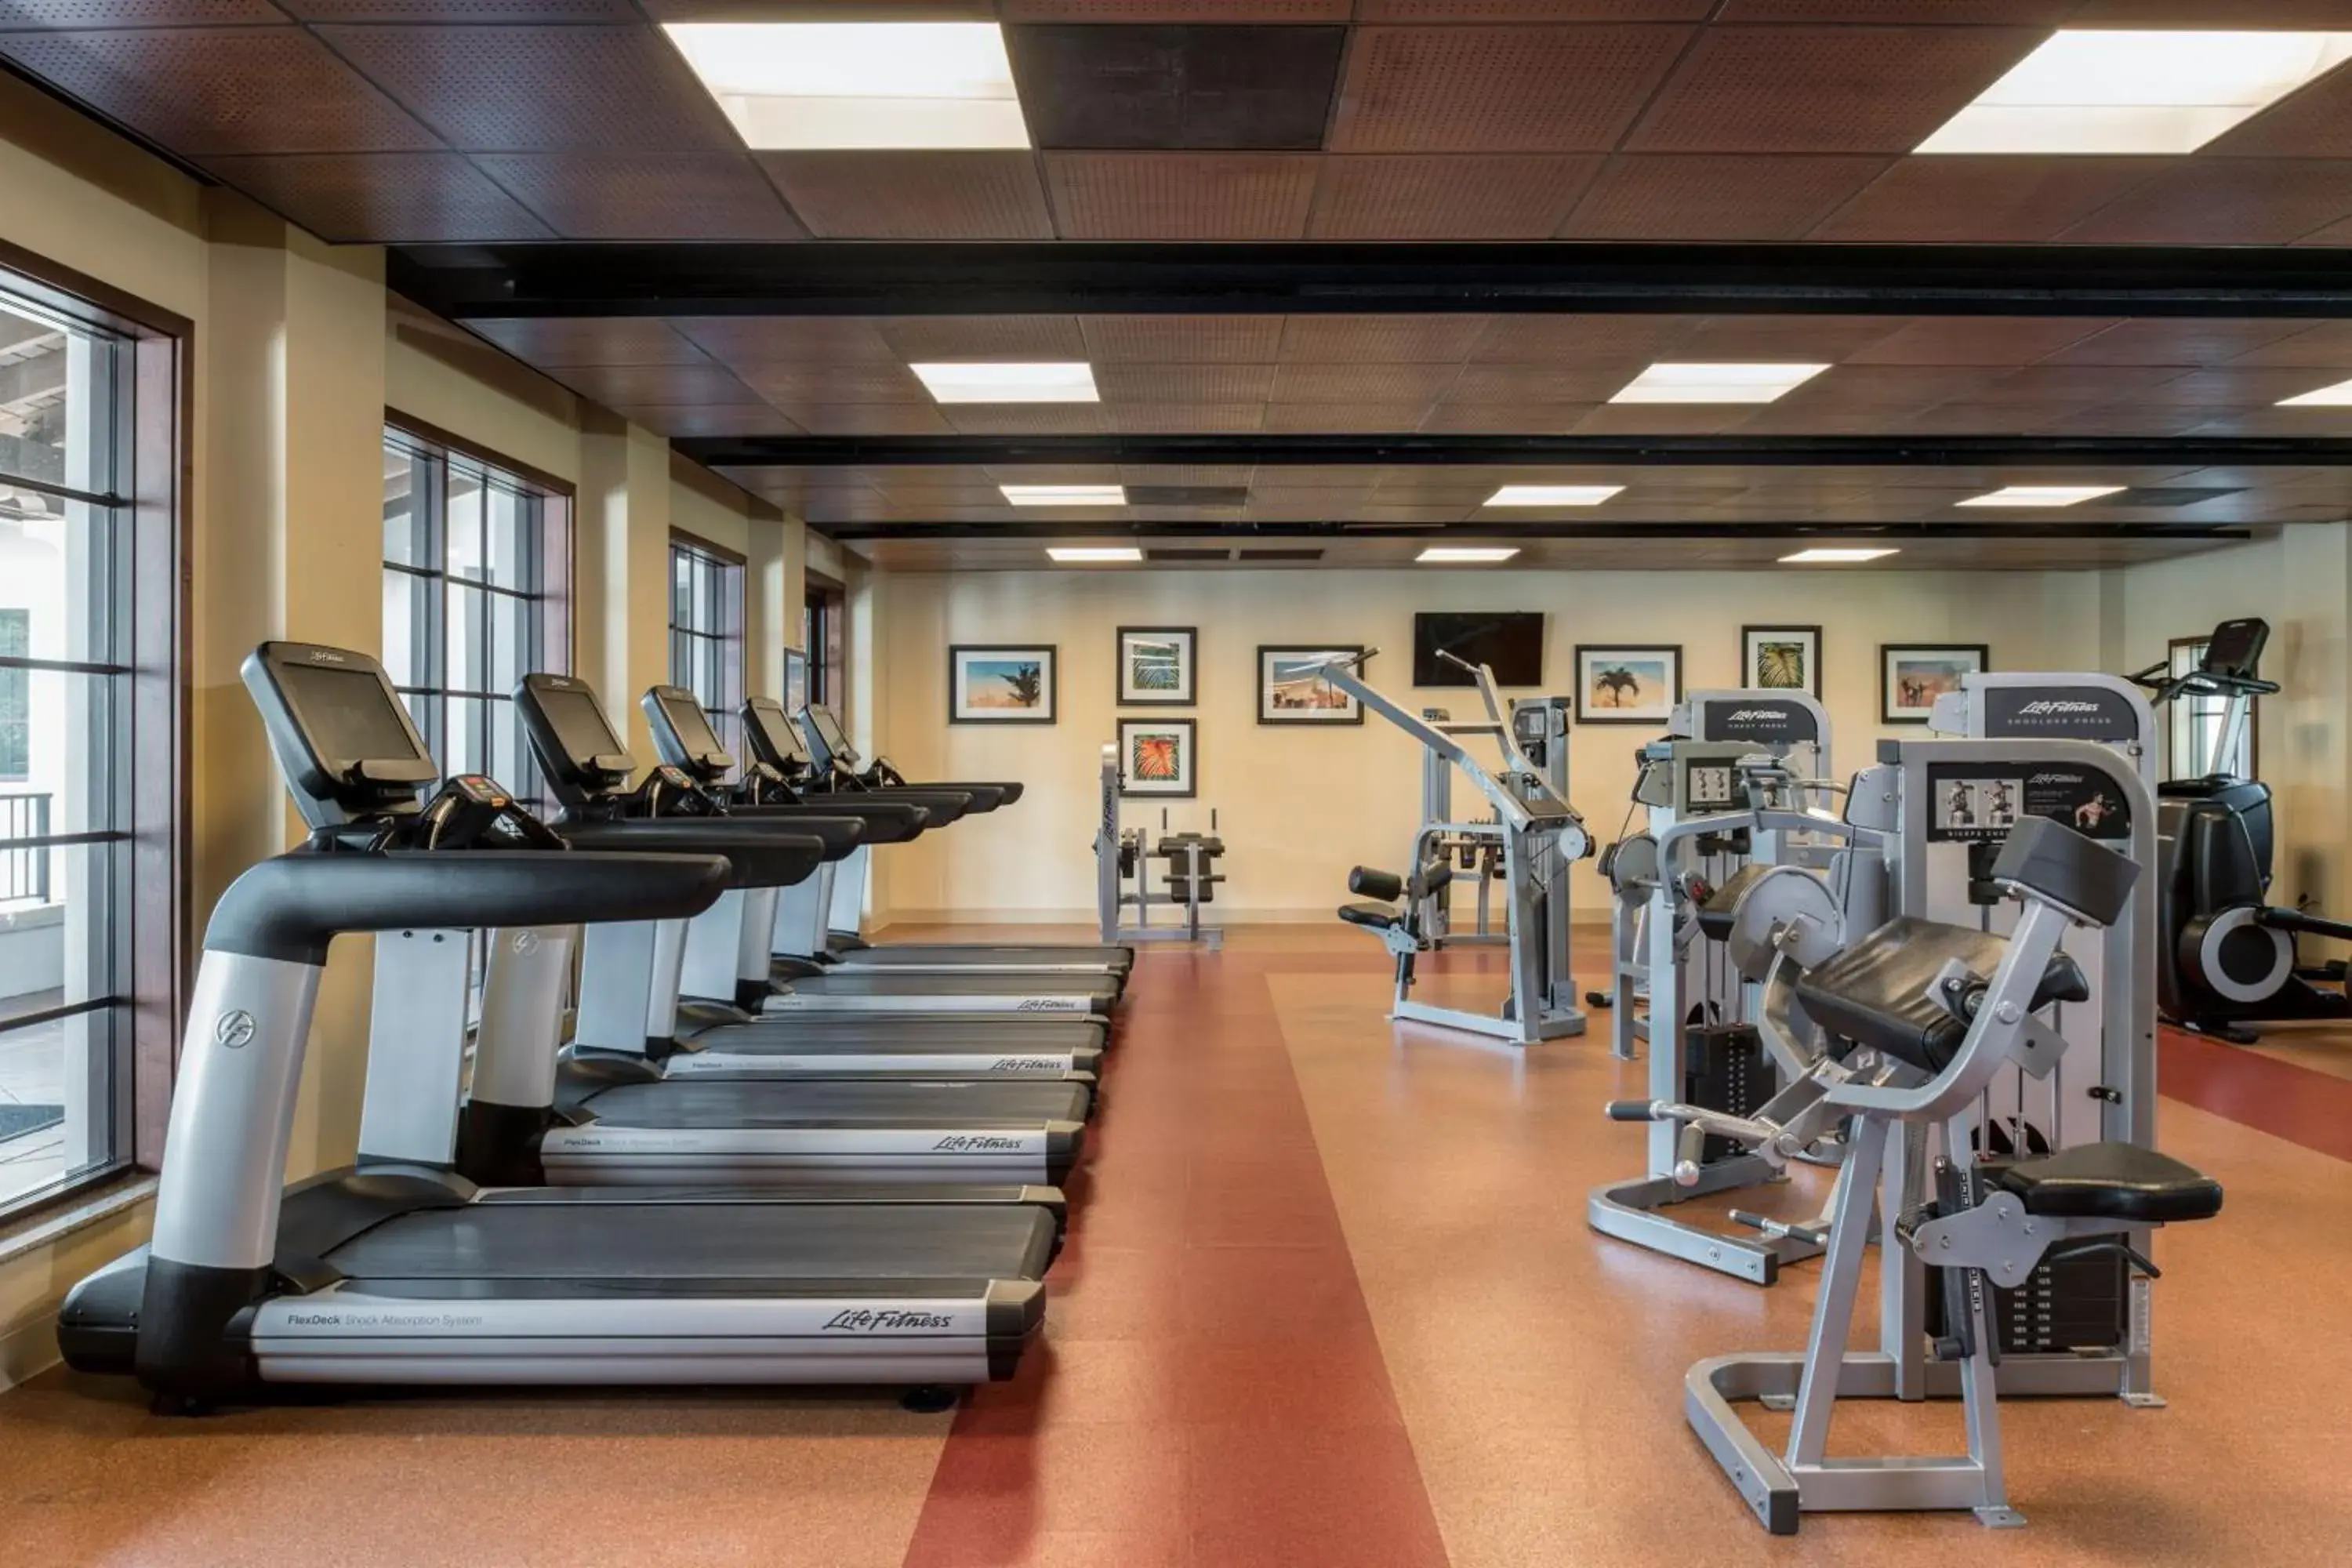 Fitness centre/facilities, Fitness Center/Facilities in Marriott's Lakeshore Reserve